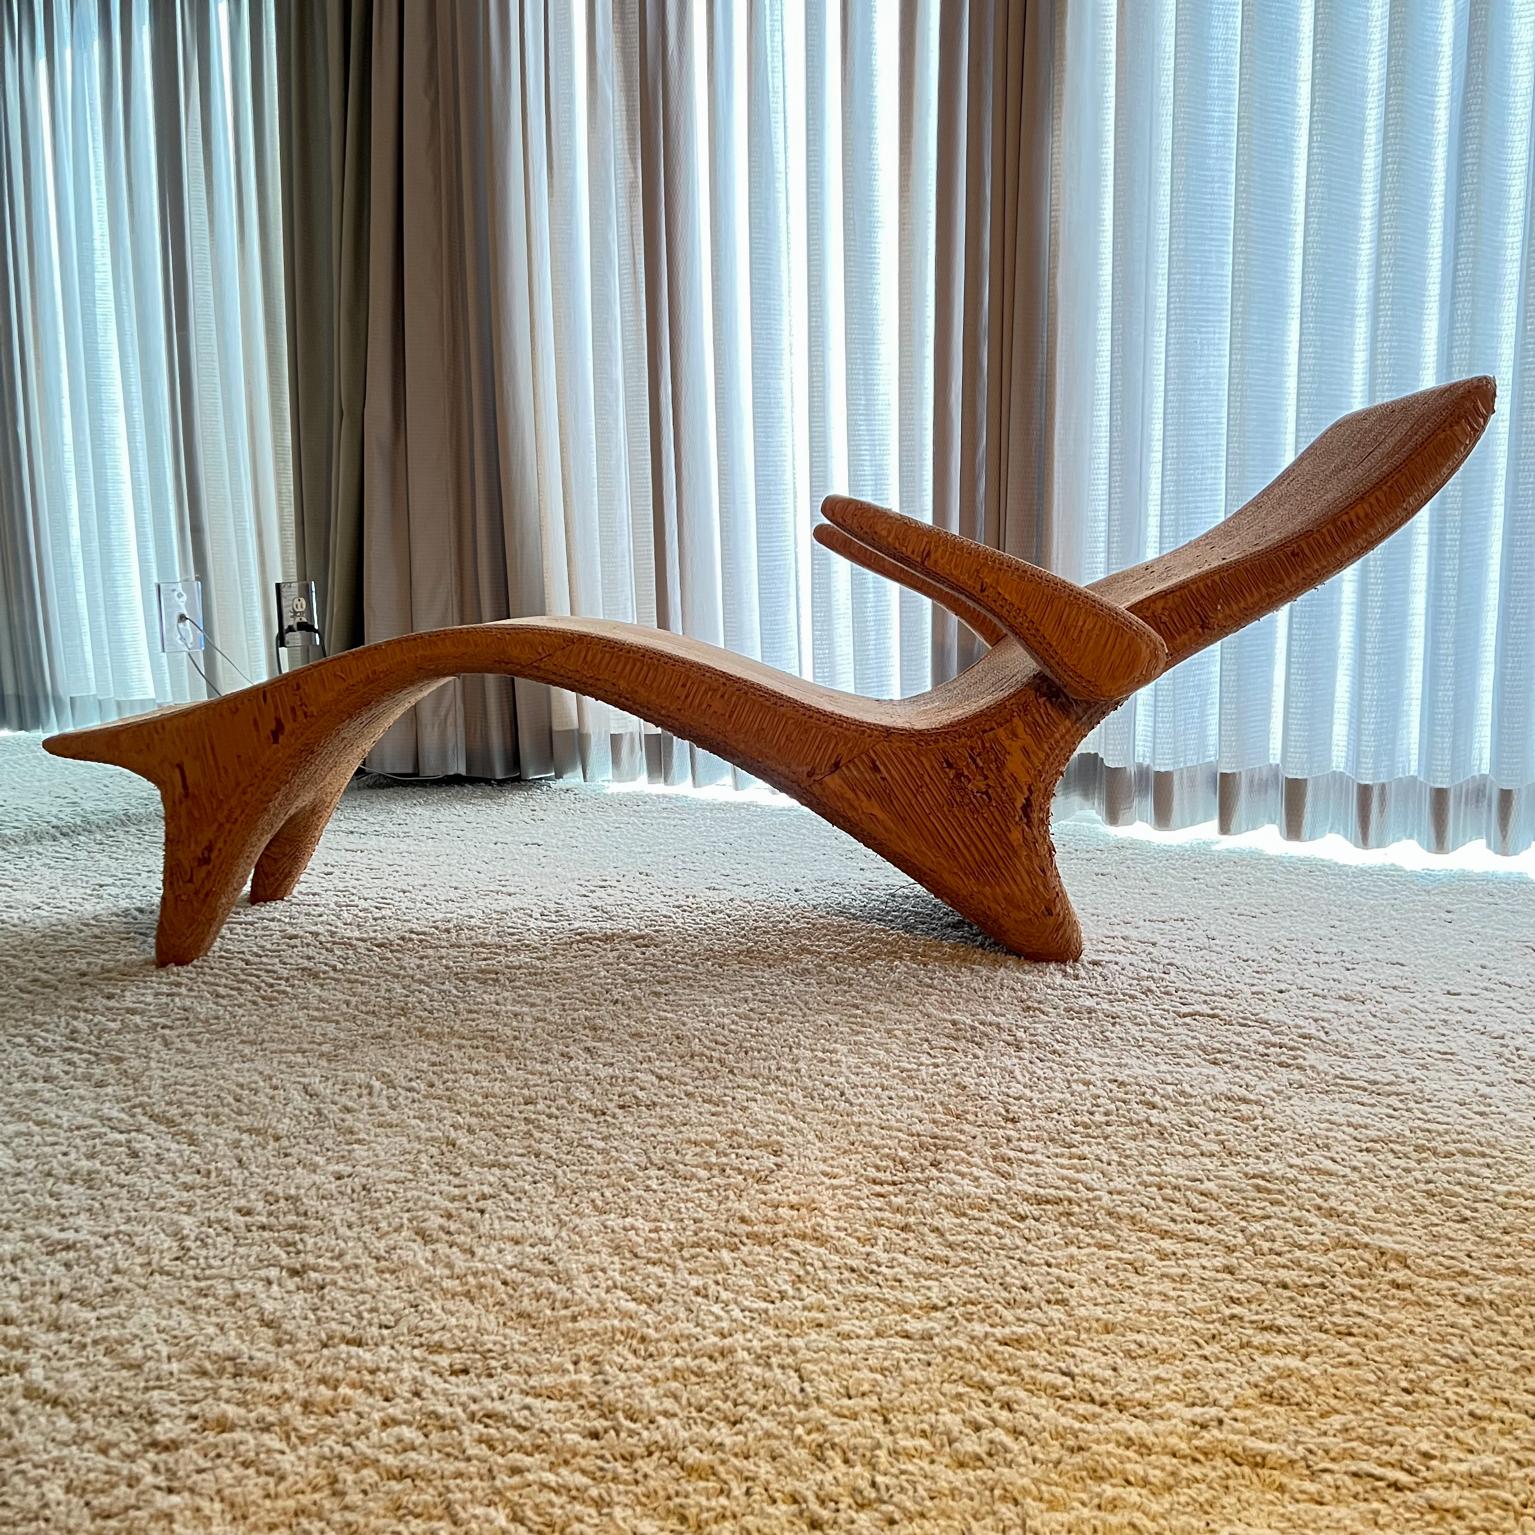  1970s Chaise Lounge LA Art Chair Style of Frank Gehry  In Good Condition For Sale In Chula Vista, CA